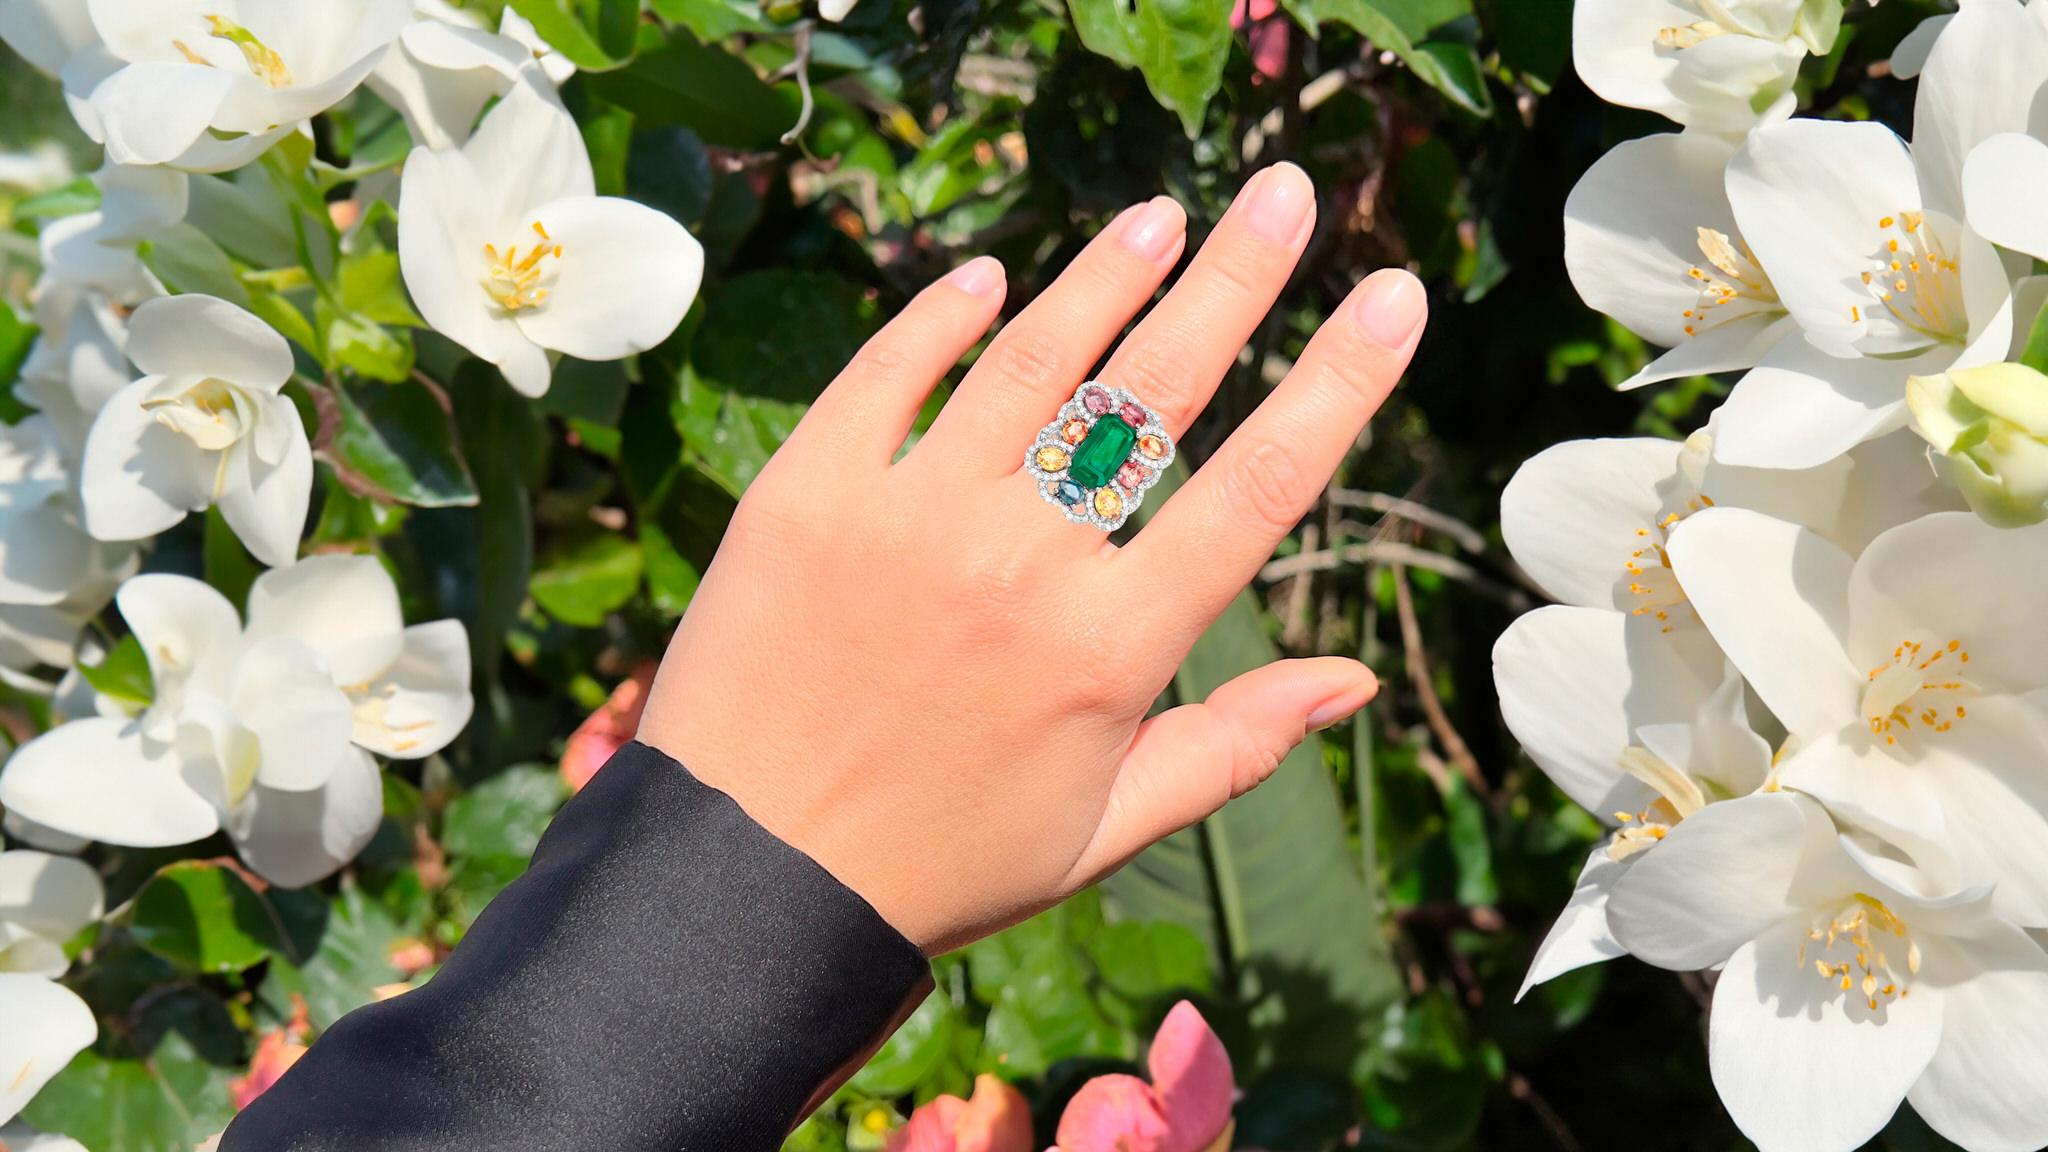 It comes with the Gemological Appraisal by GIA GG/AJP
All Gemstones are Natural
Emerald = 4.30 Carat
8 Multicolor Sapphires = 3.75 Carats
82 Diamonds = 0.75 Carats
Metal: Black Rhodium Plated Sterling Silver
Ring Size: 7.25* US
*It can be resized